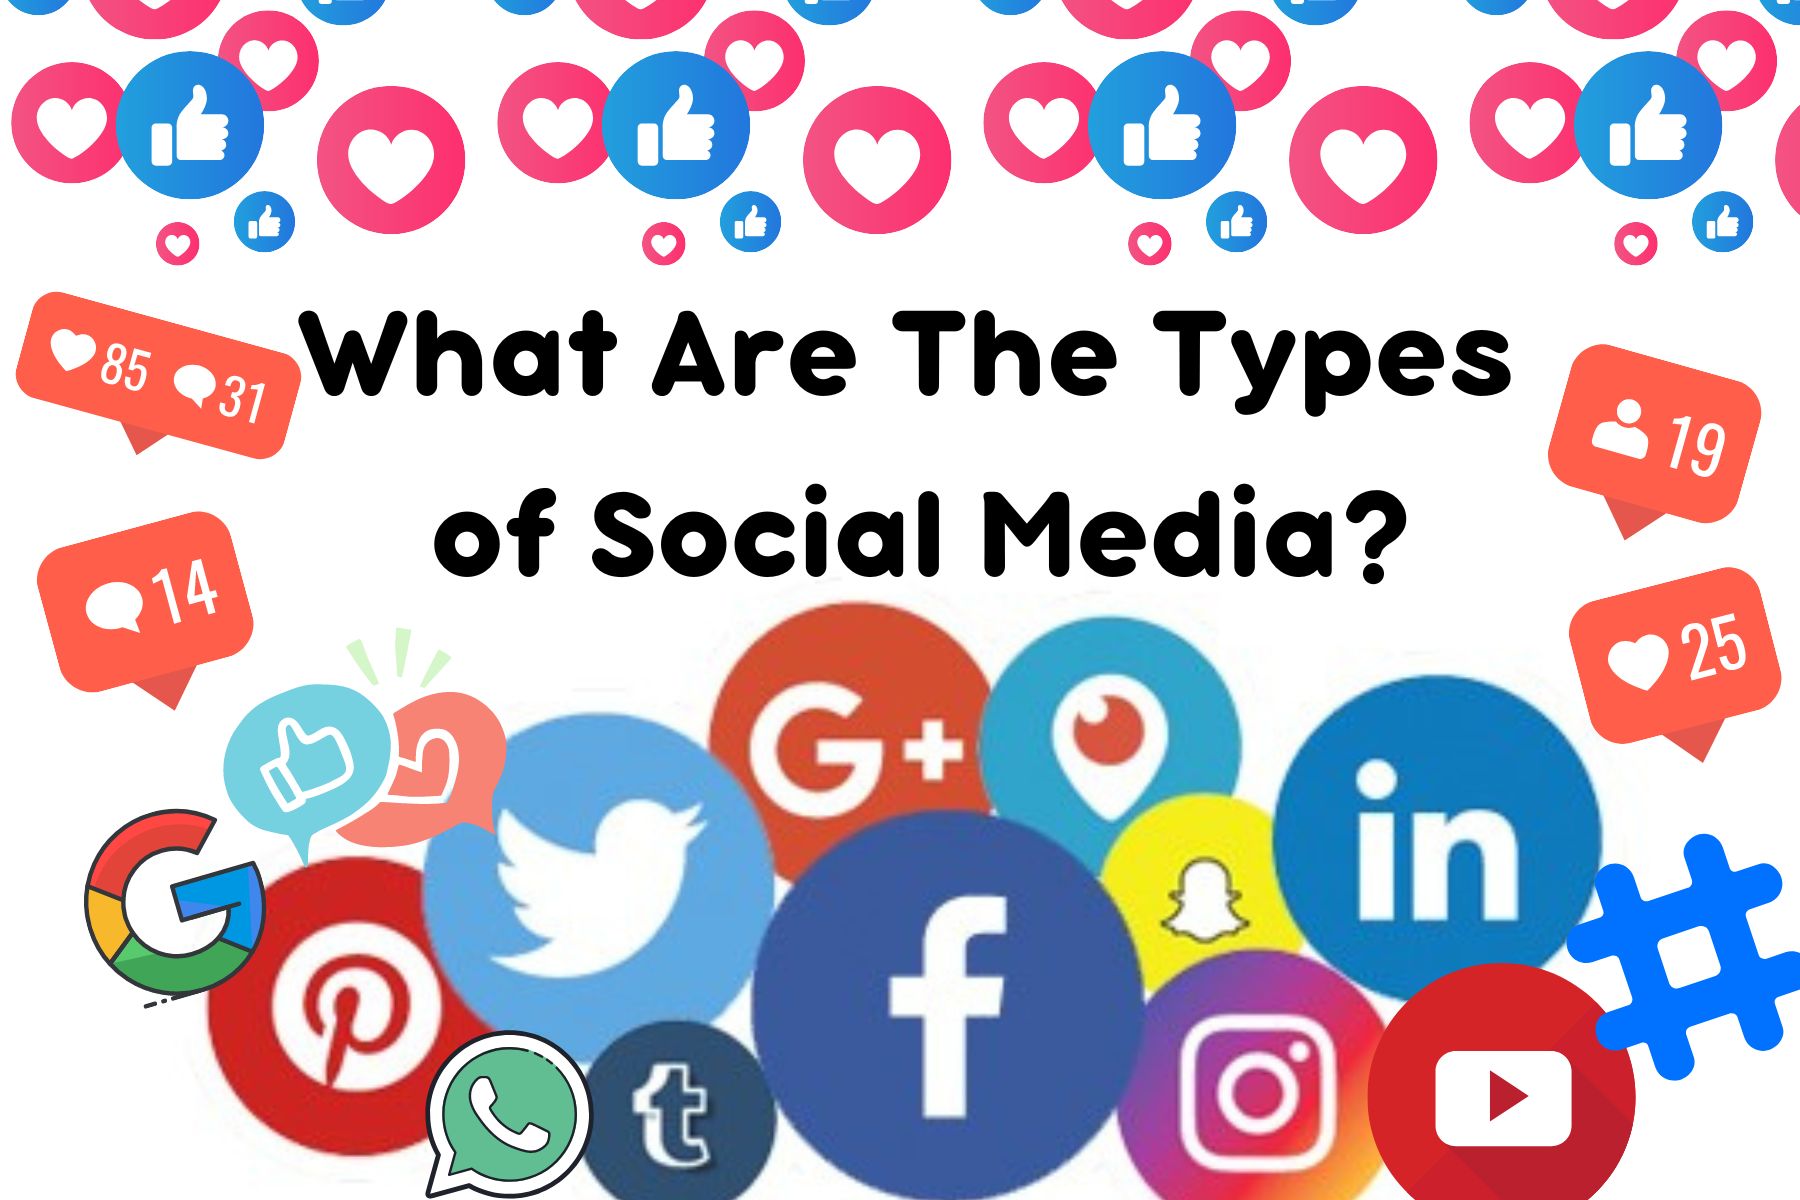 What are the types of social media?